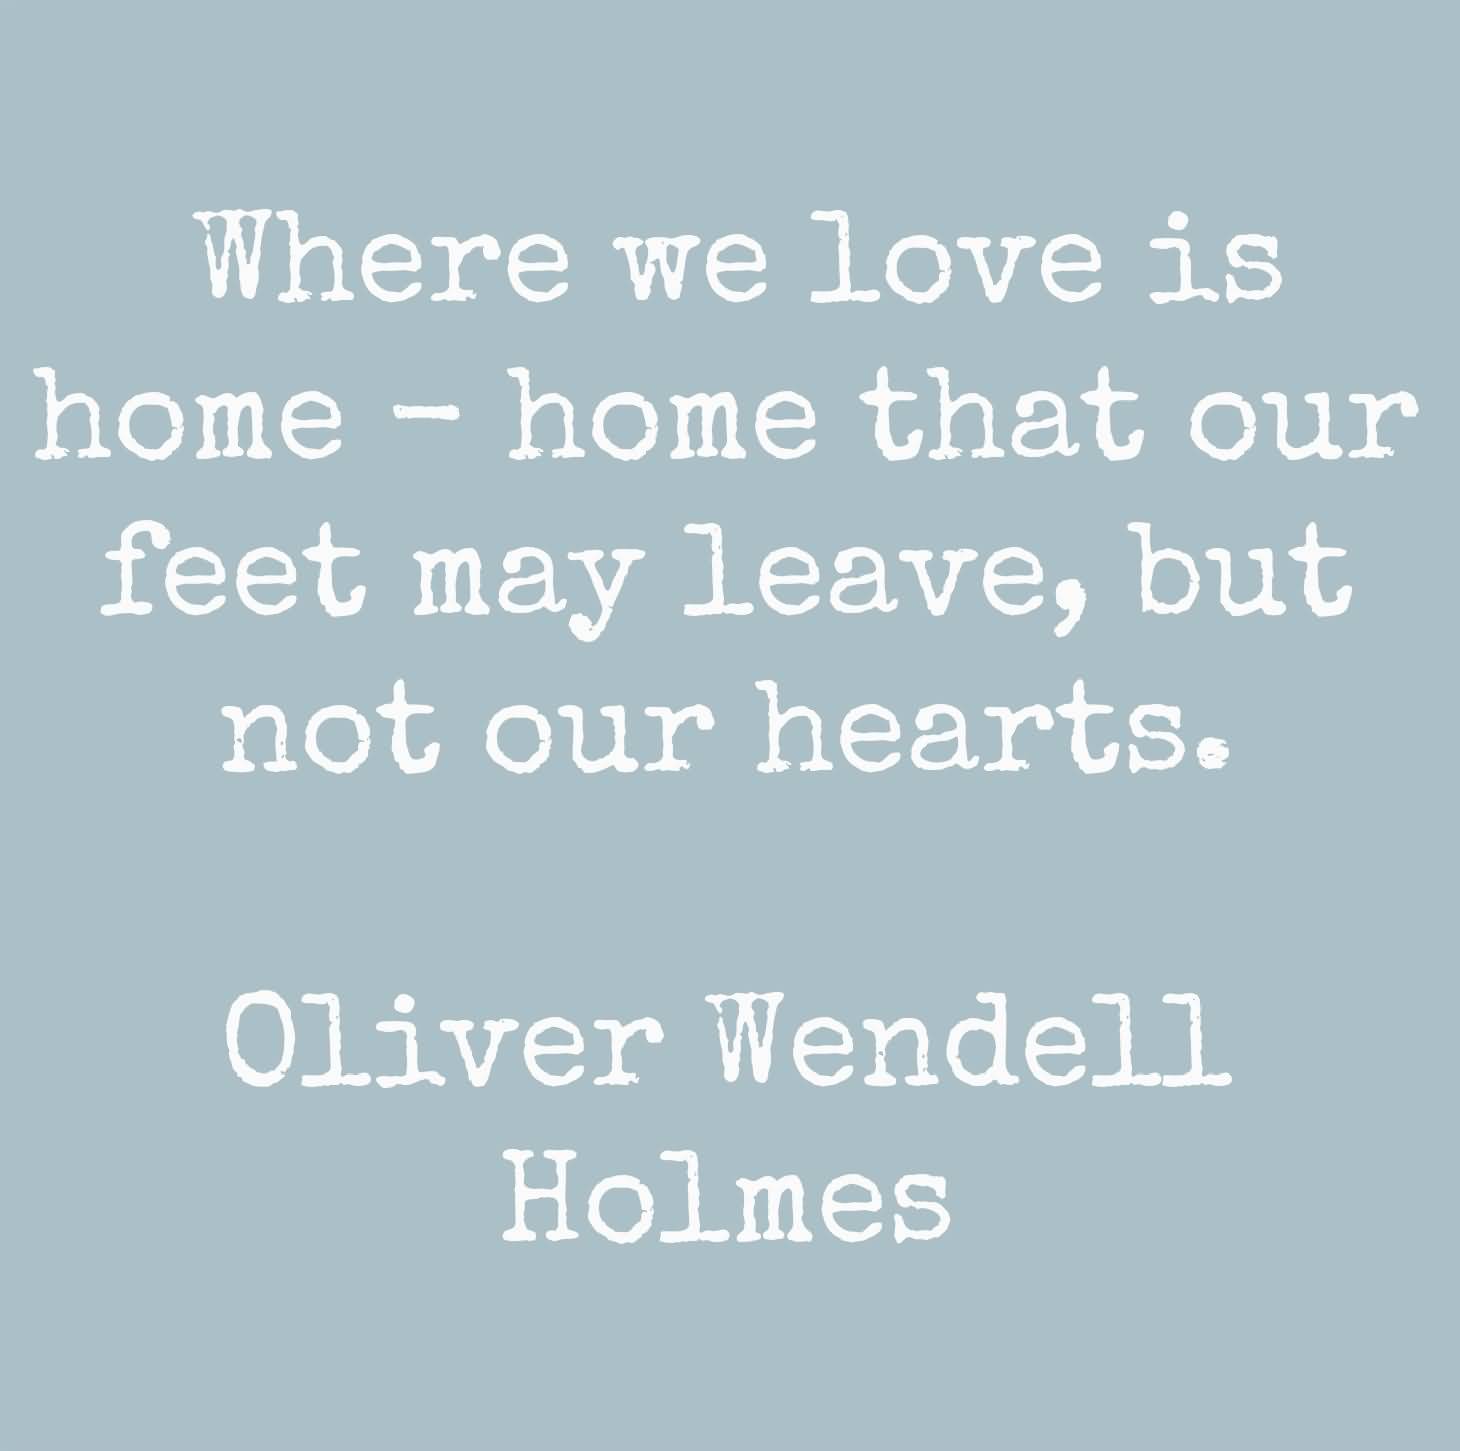 Where we love is home, home that our feet may leave, but not our hearts.